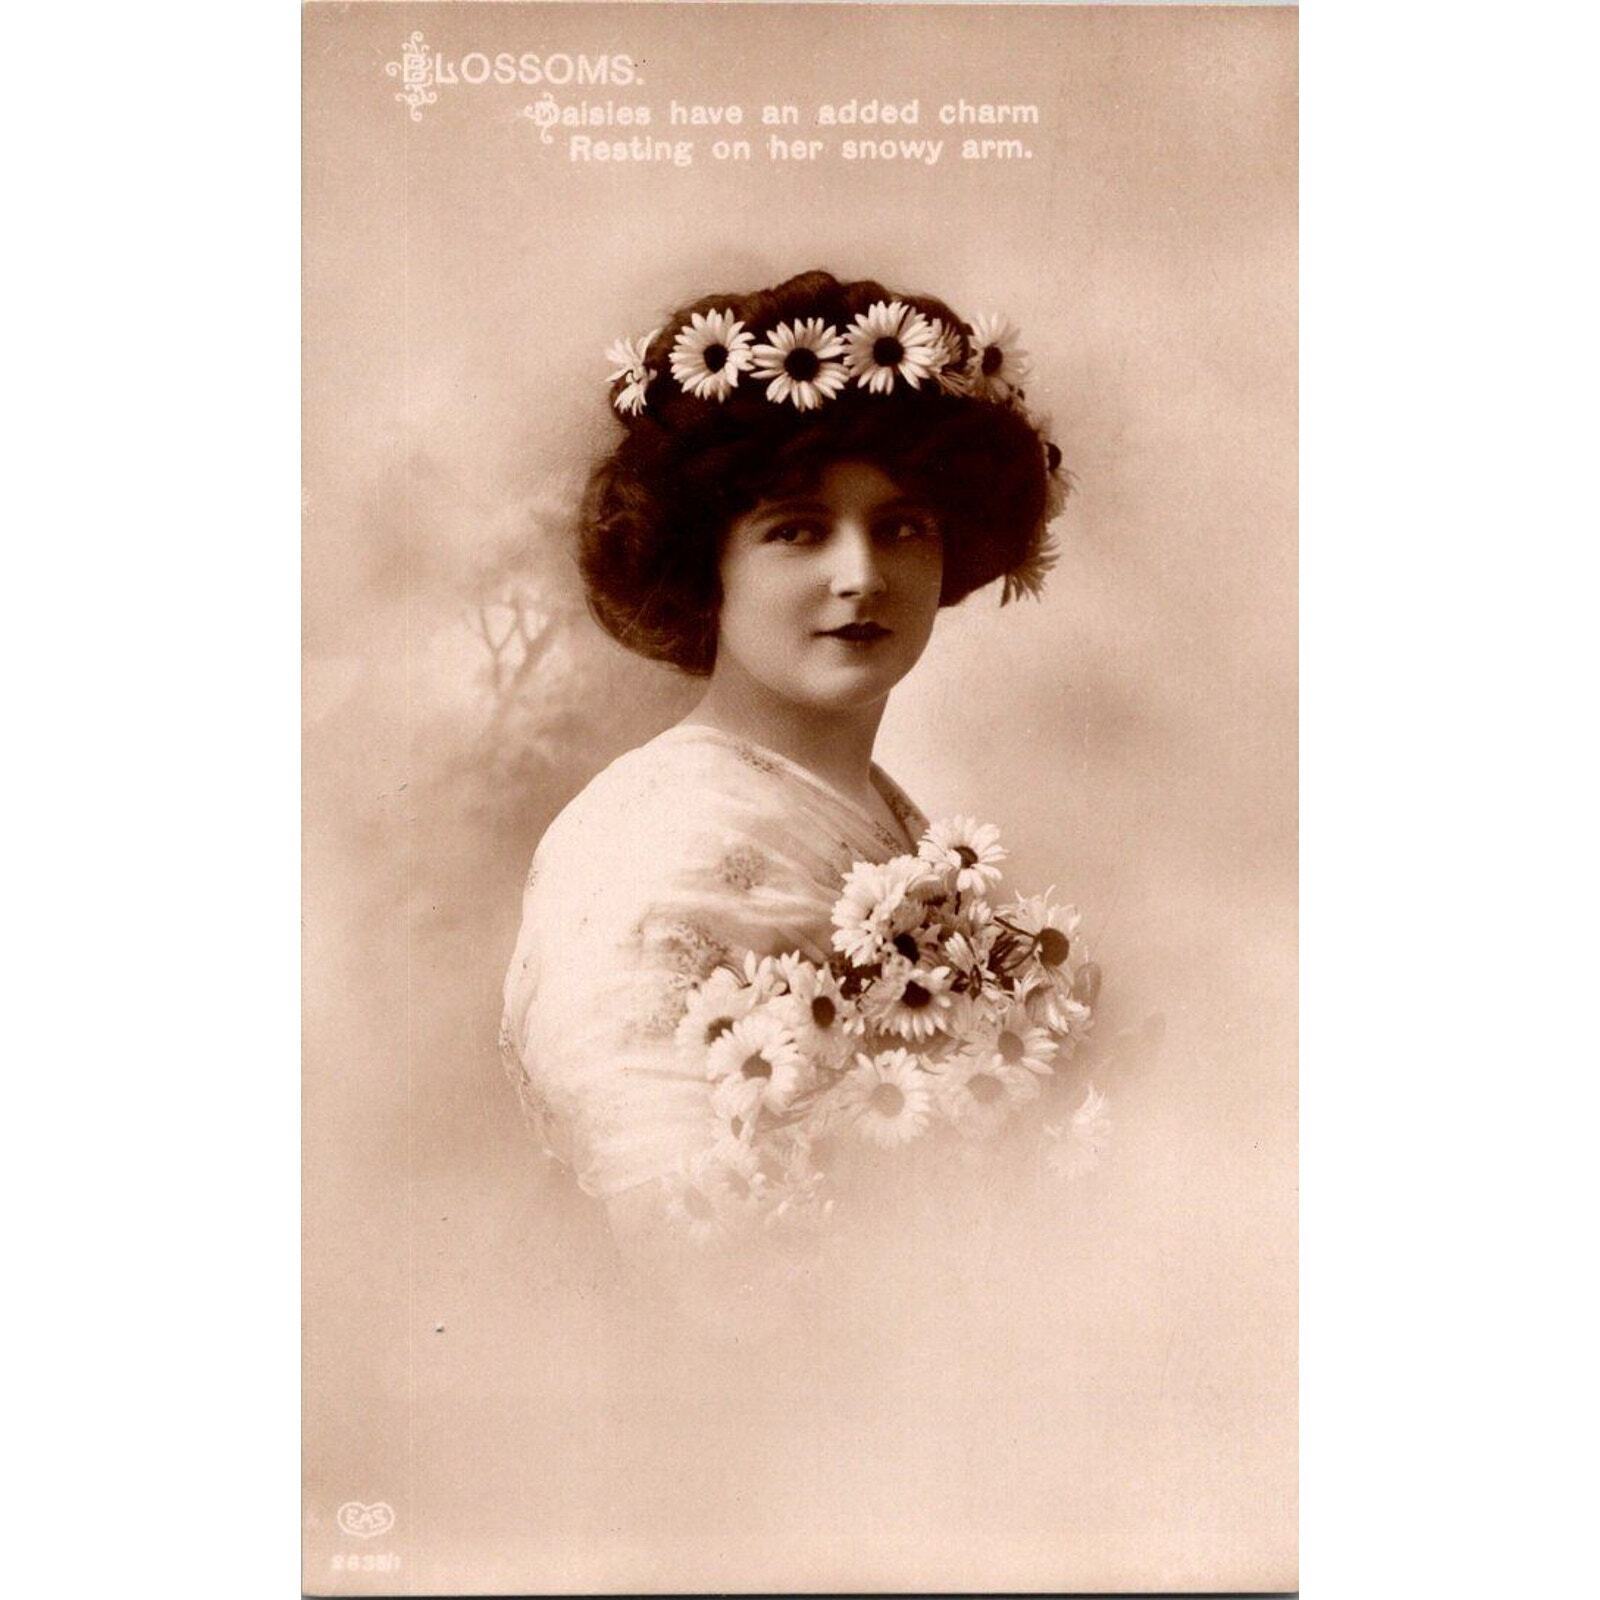 Vintage Edwardian Postcard Woman RPPC 1900\'s Blossoms Quote Daisies in Hair